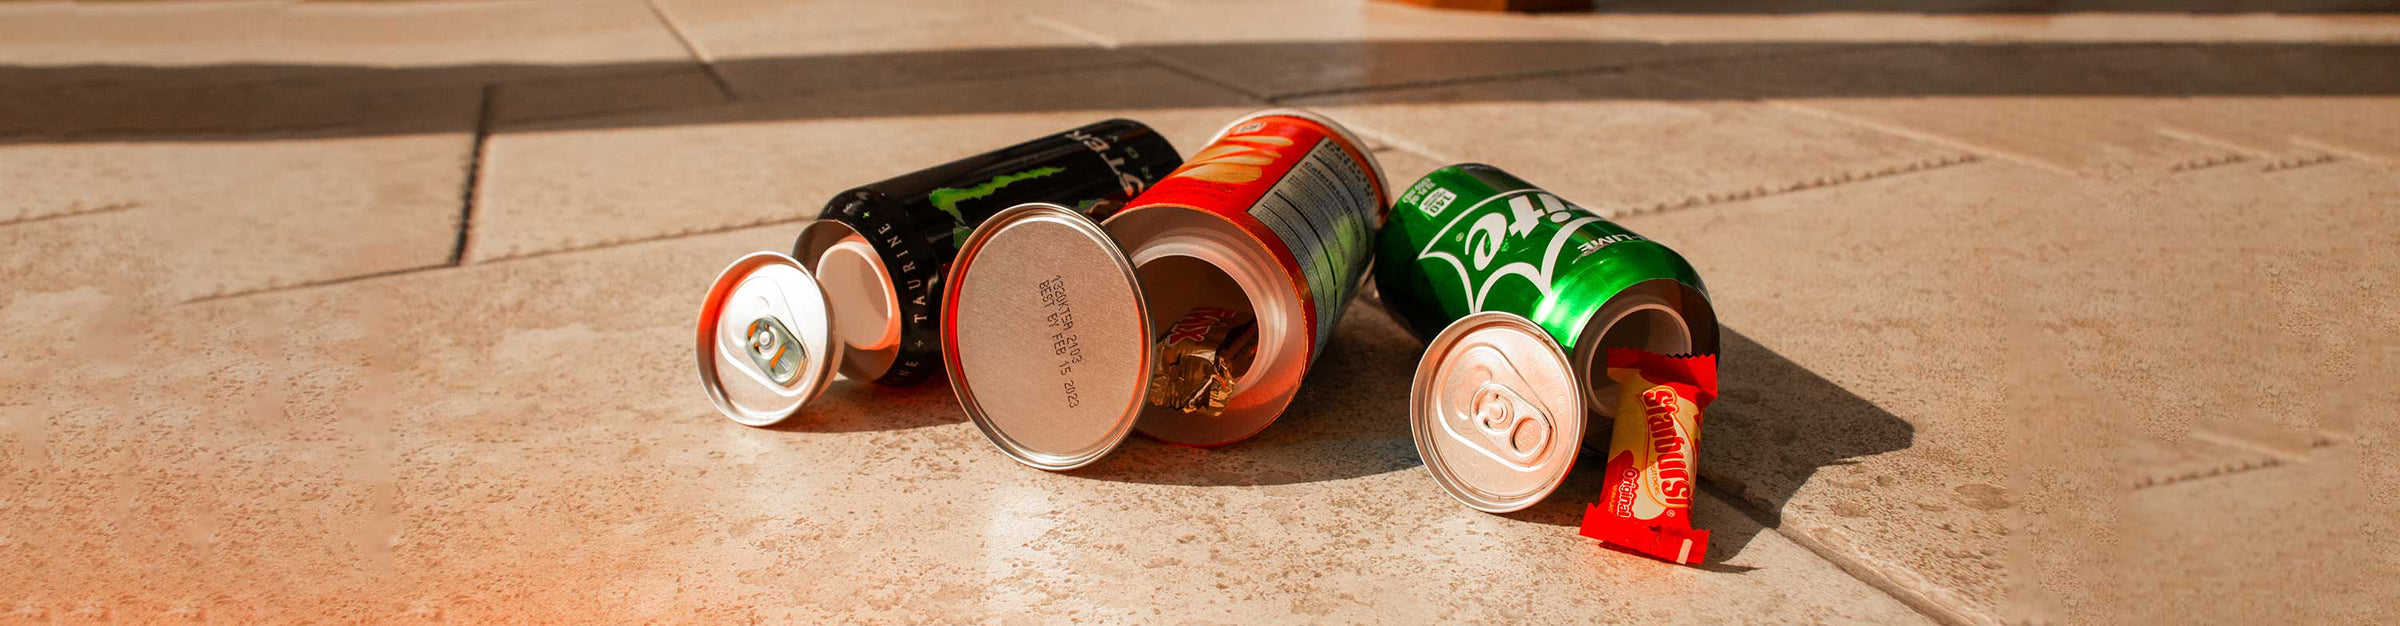 Wholesale Diversion Safe Cans laying down on office floor with all lids open and items inside.